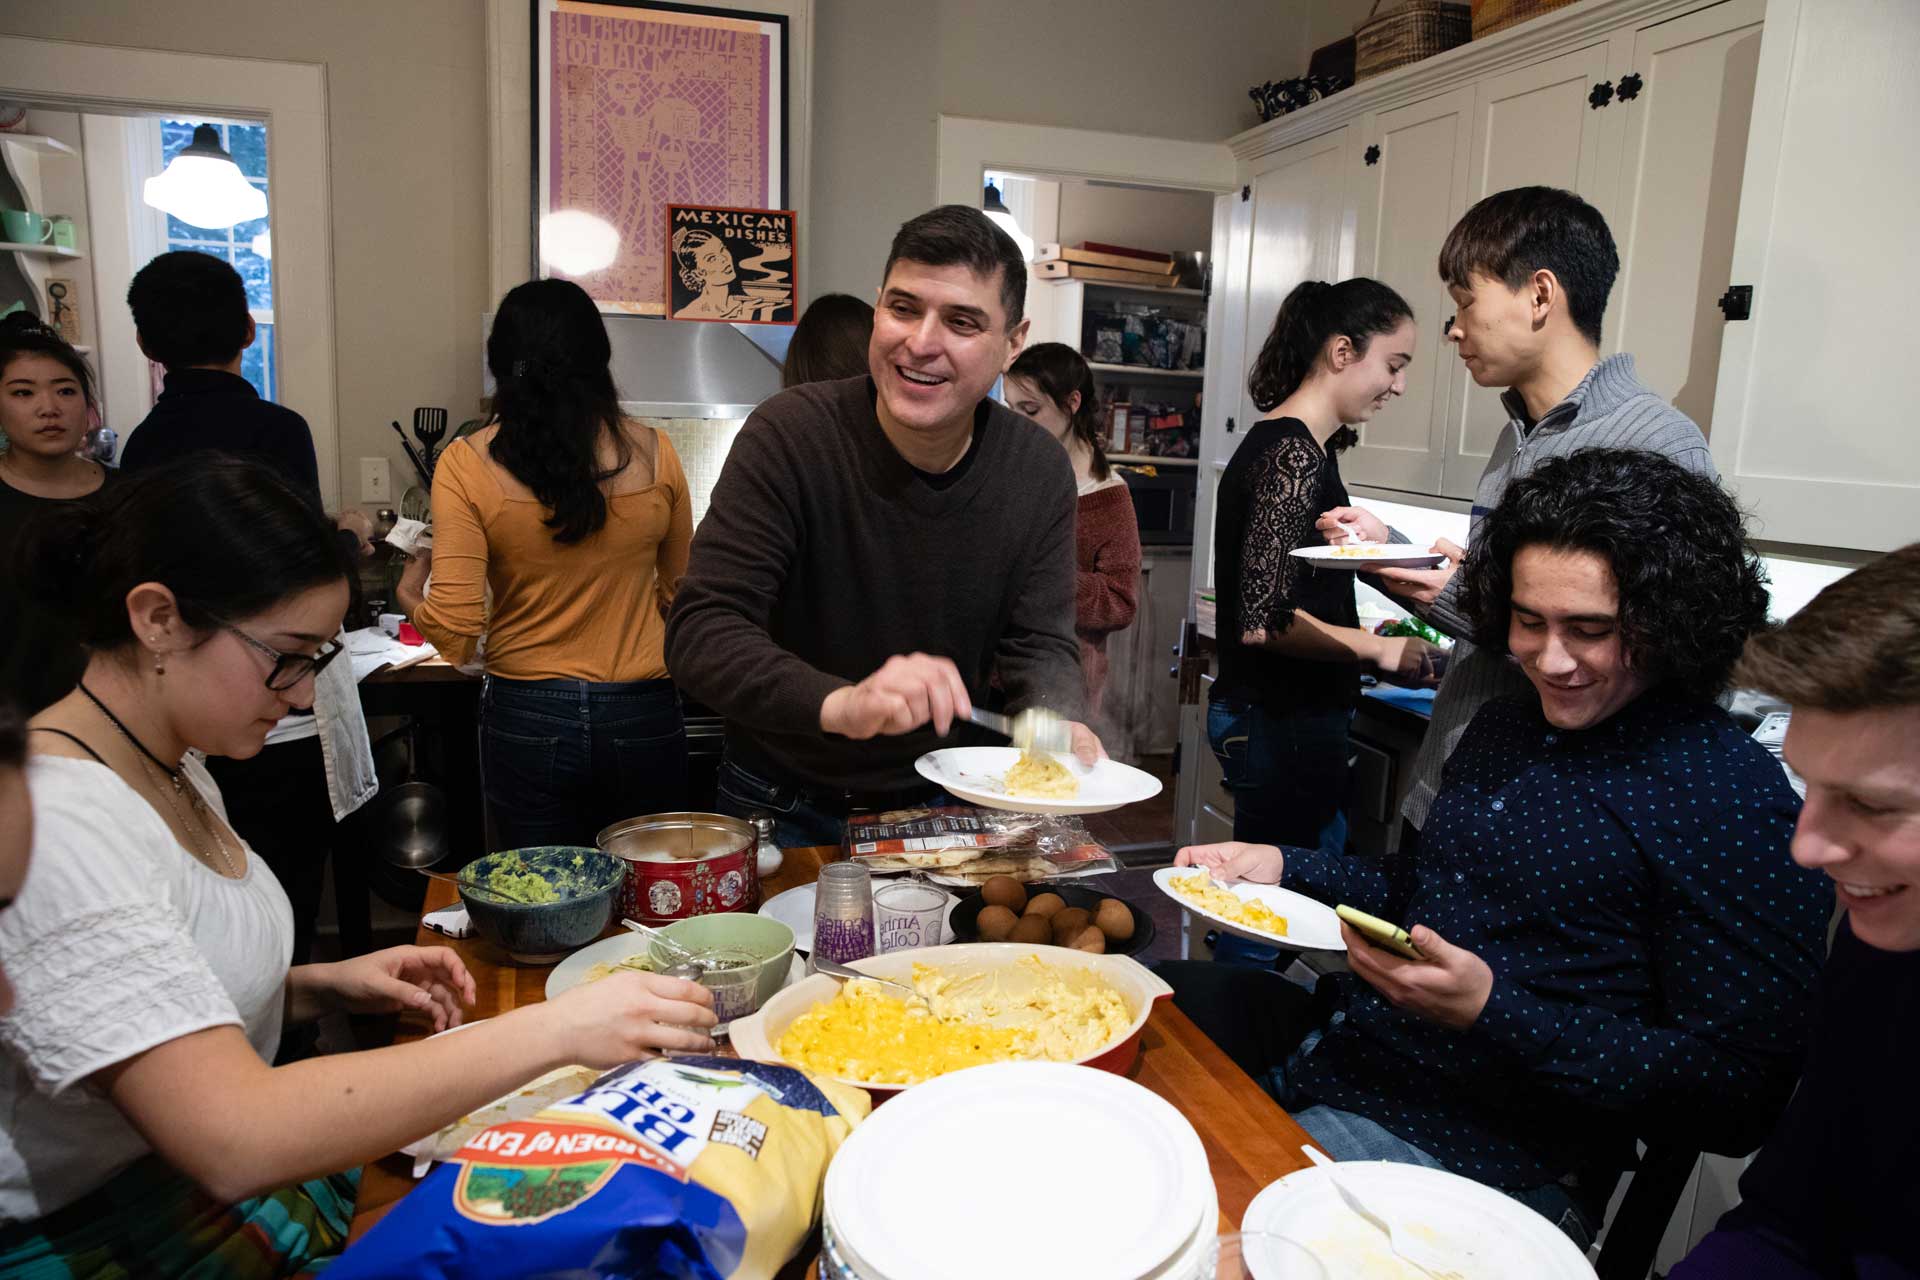 College students eating together in a kitchen